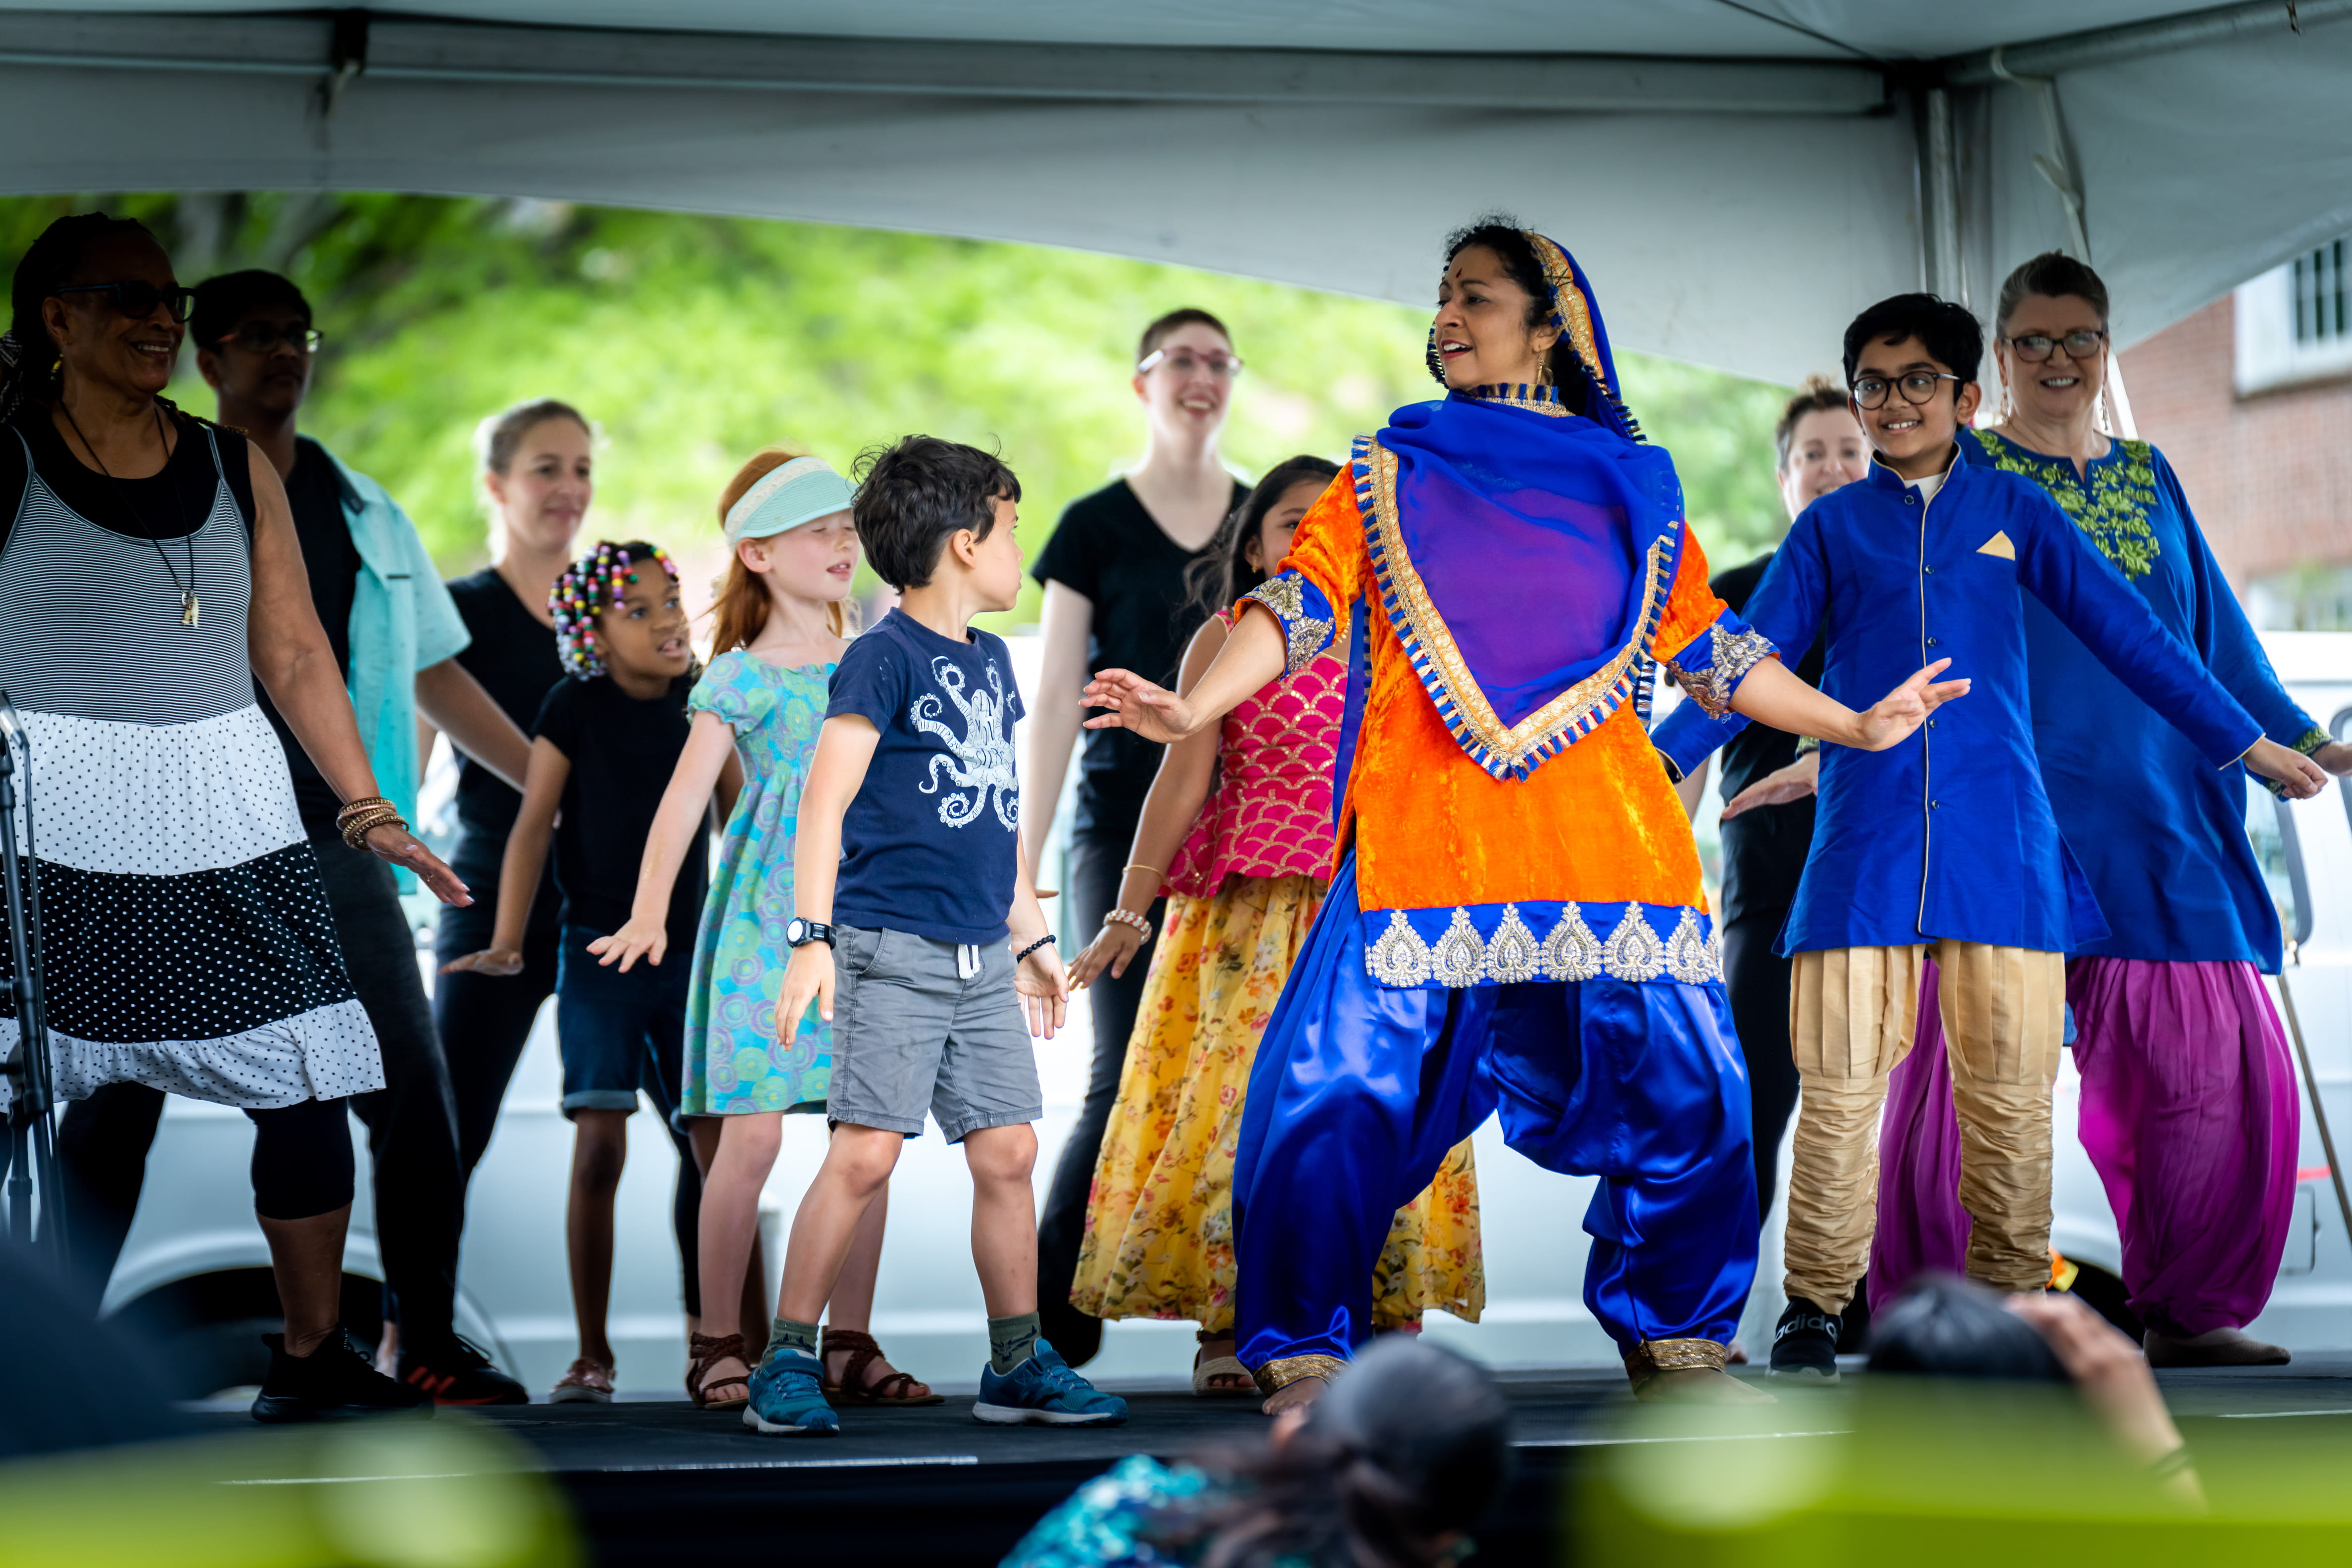 A Sri Lankan dance is performed with crowd members at the International Bazaar.